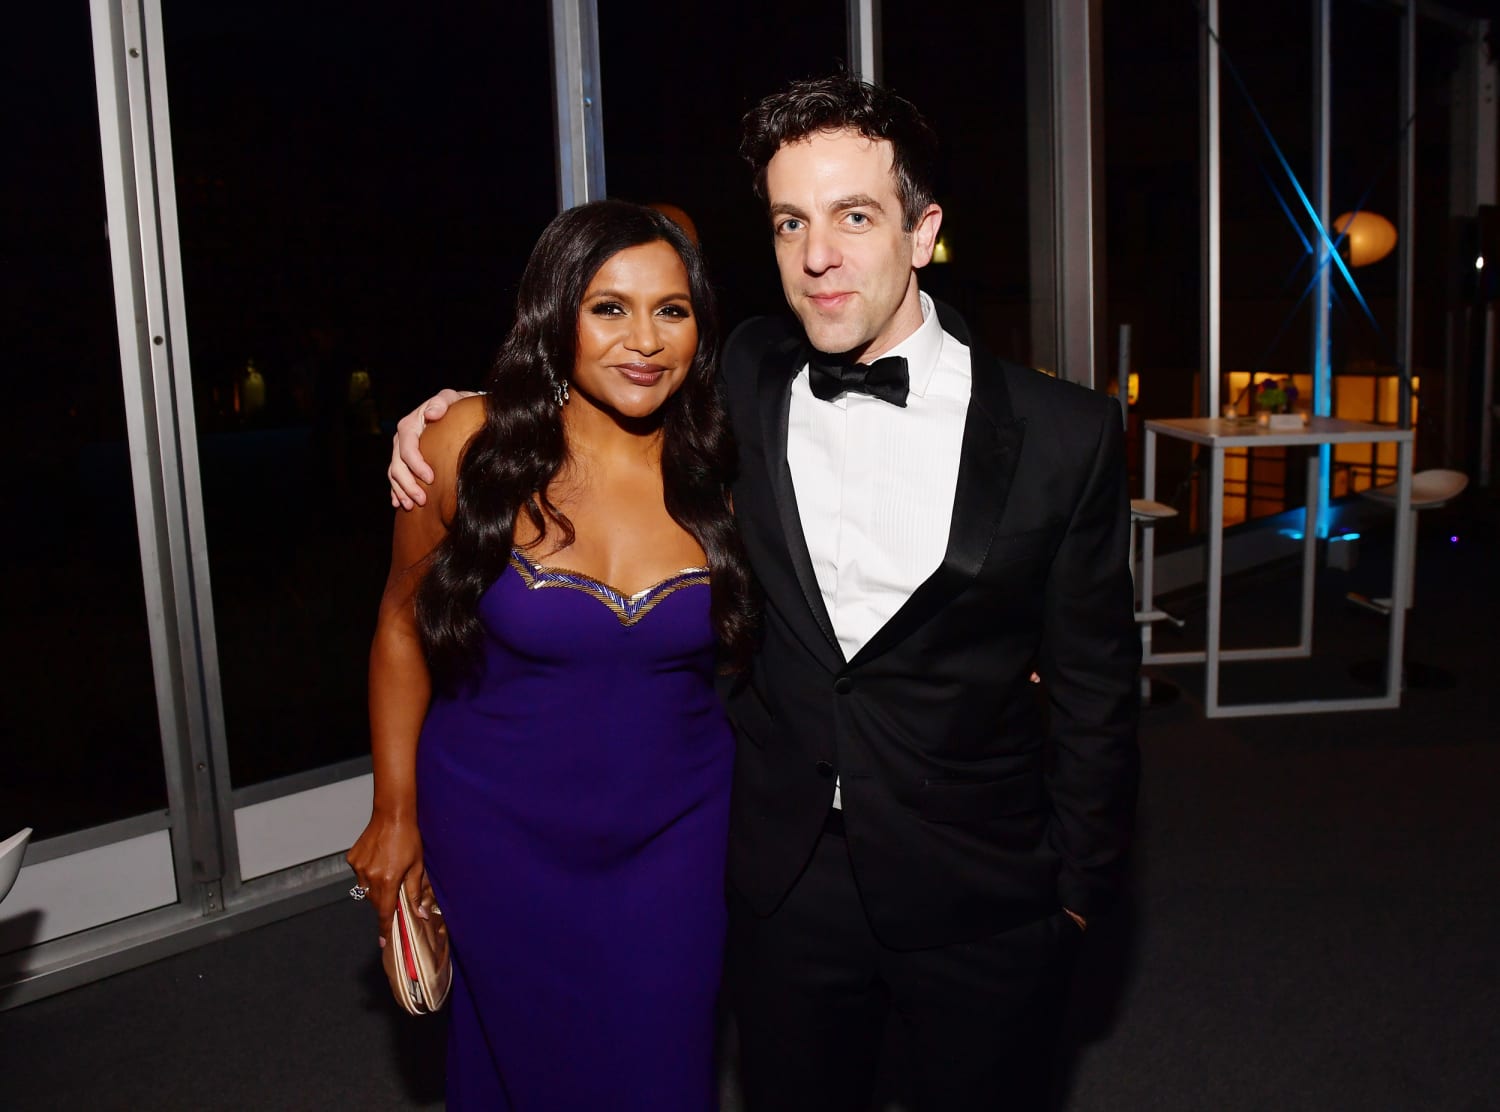 What Mindy Kaling thinks of the rumors that image